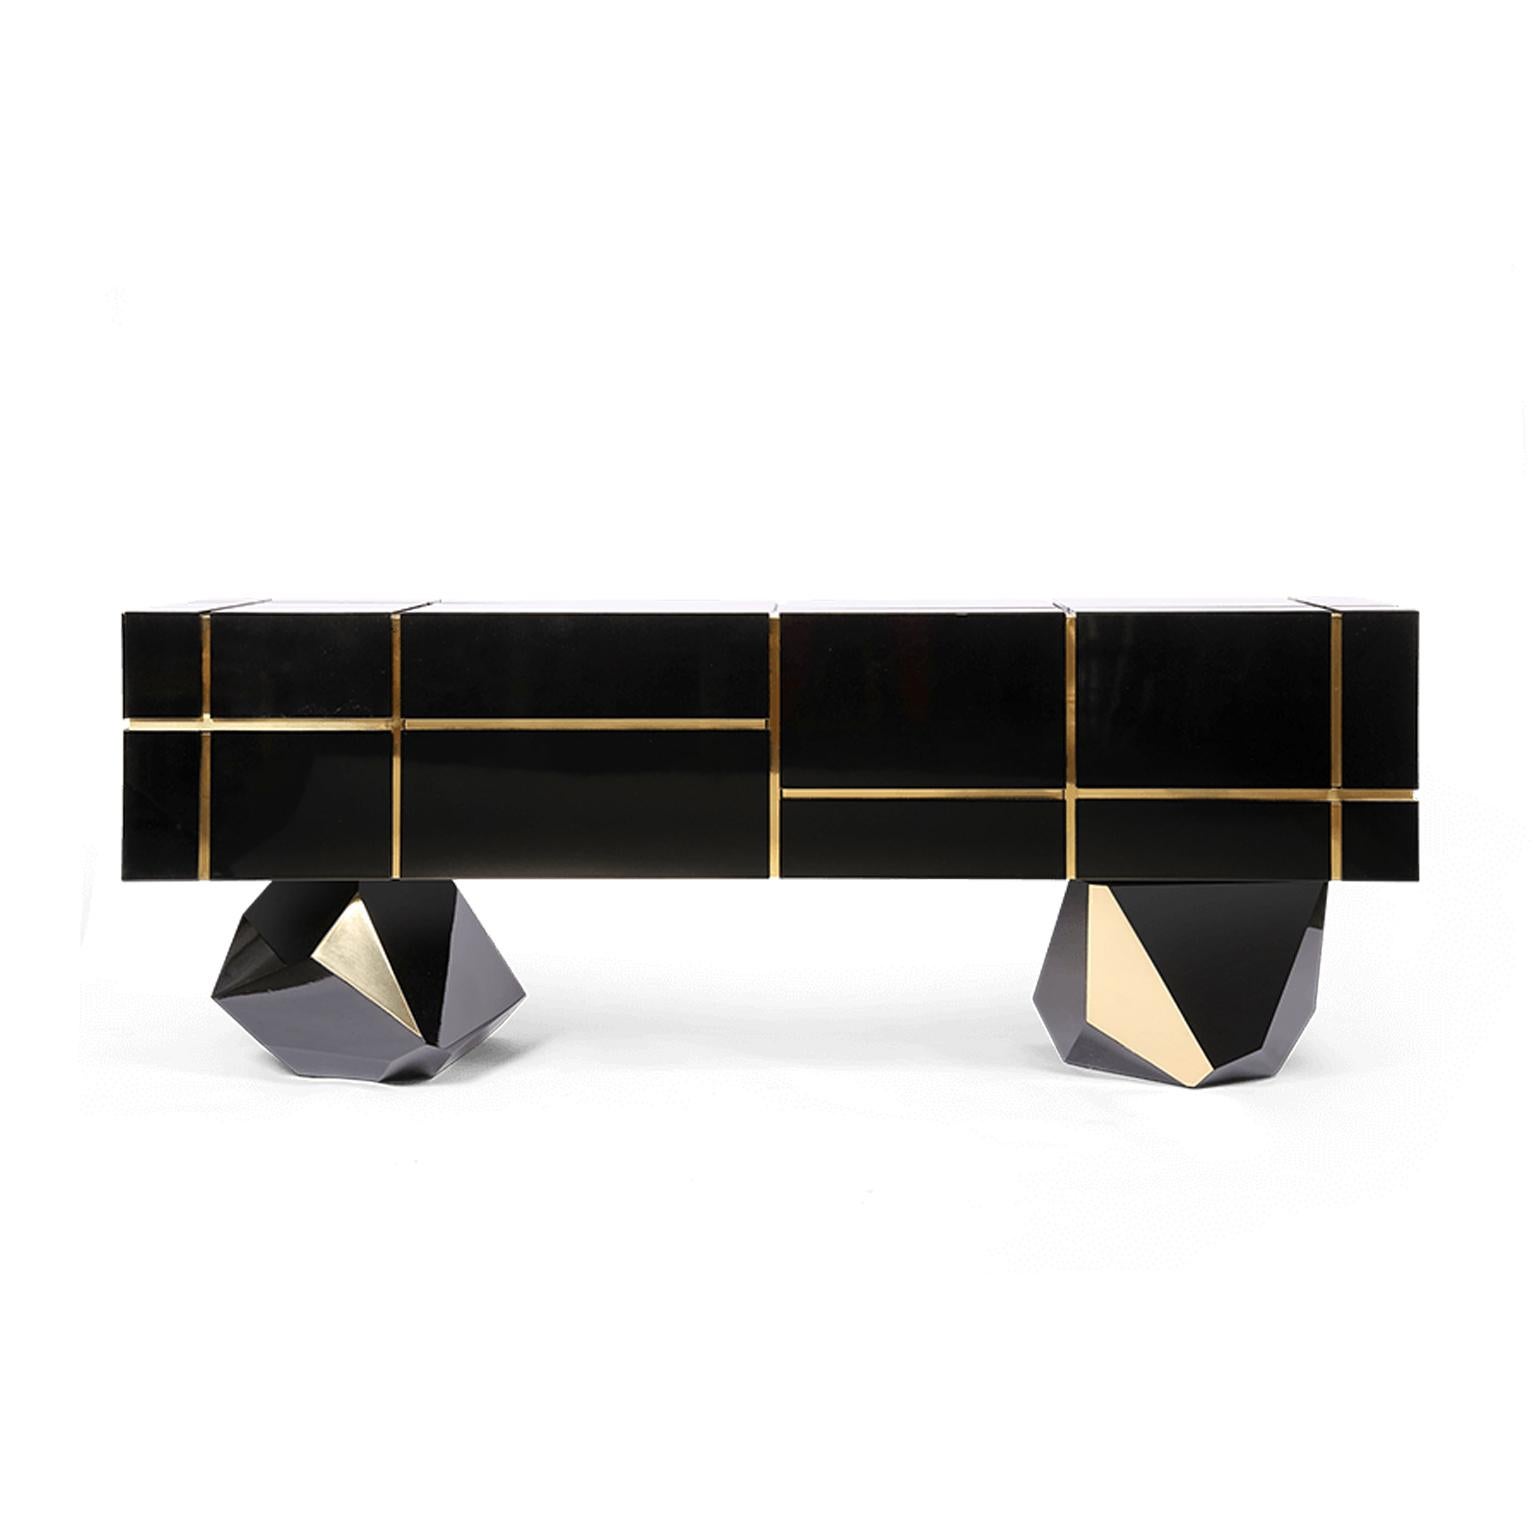 This piece is a sample from our showroom with almost invisible signs of use and it is available for immediate purchase with a great discount. 

The definition of rich furniture design, this beautiful sideboard is handmade with high-gloss black